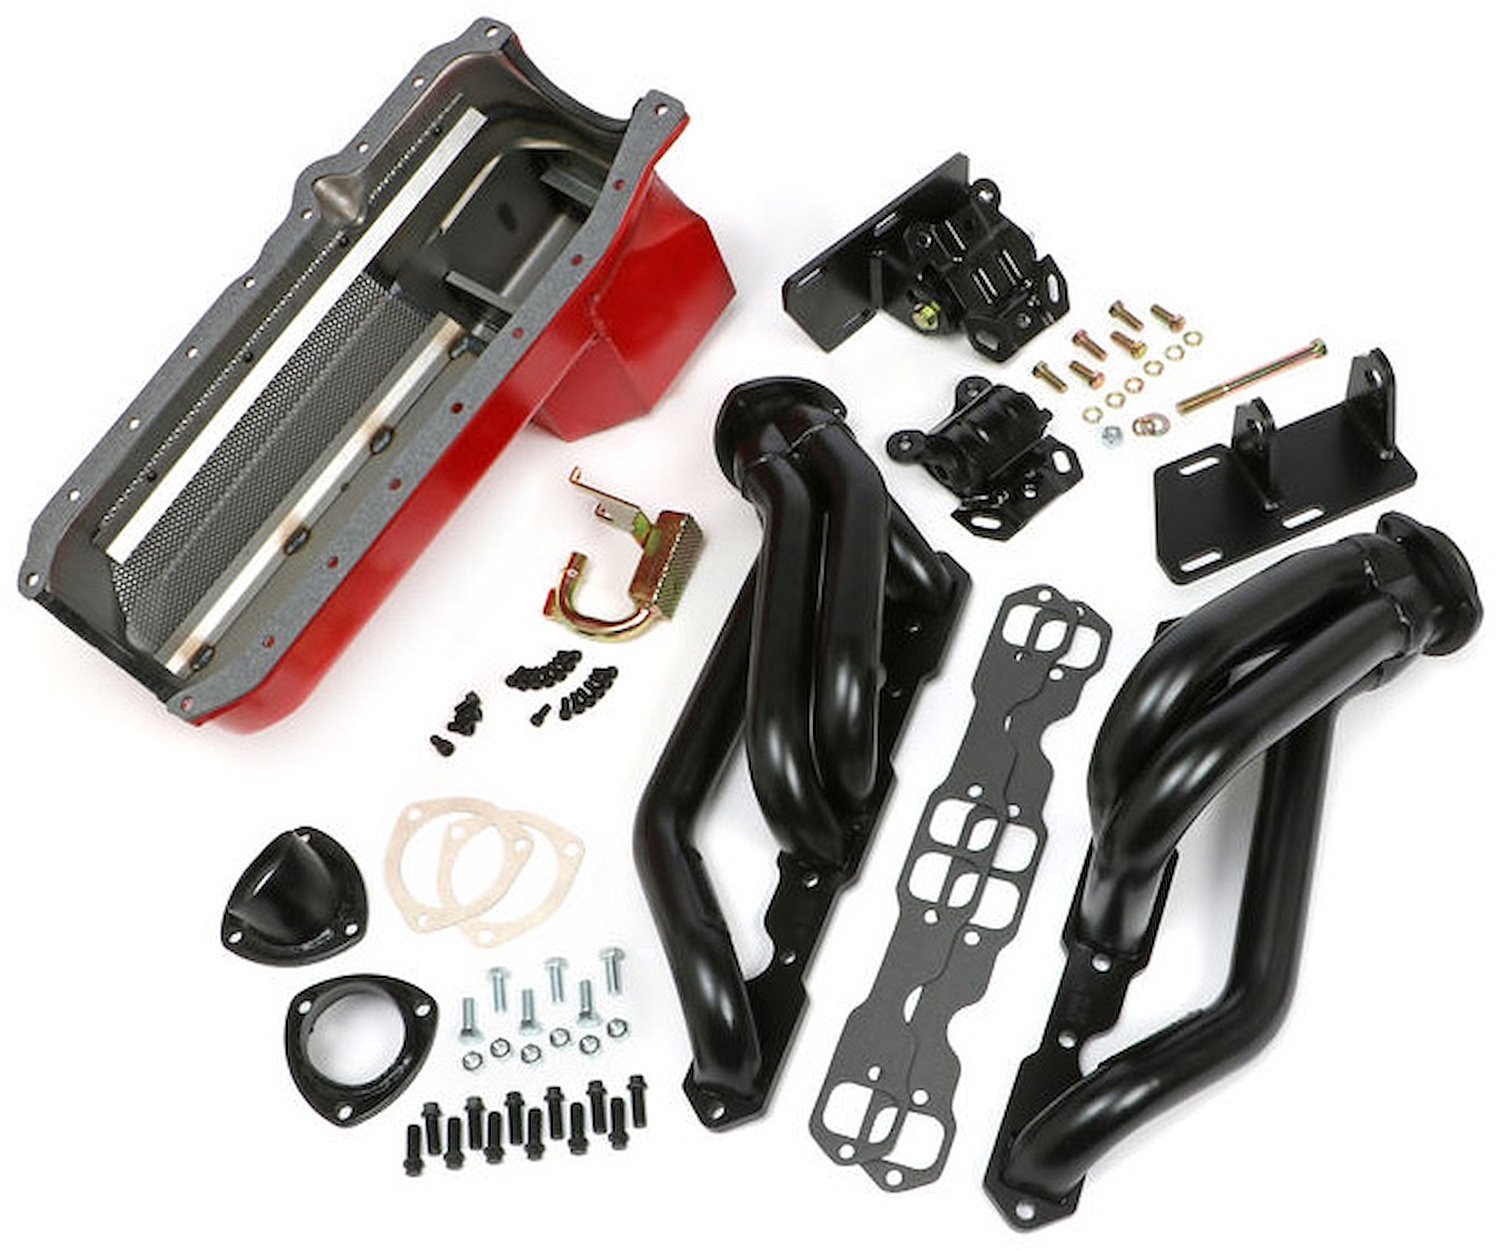 Swap in a Box Kit 1986-2000 Small Block Chevy into 1982-2004 2WD Chevy S10/GMC S15 Truck